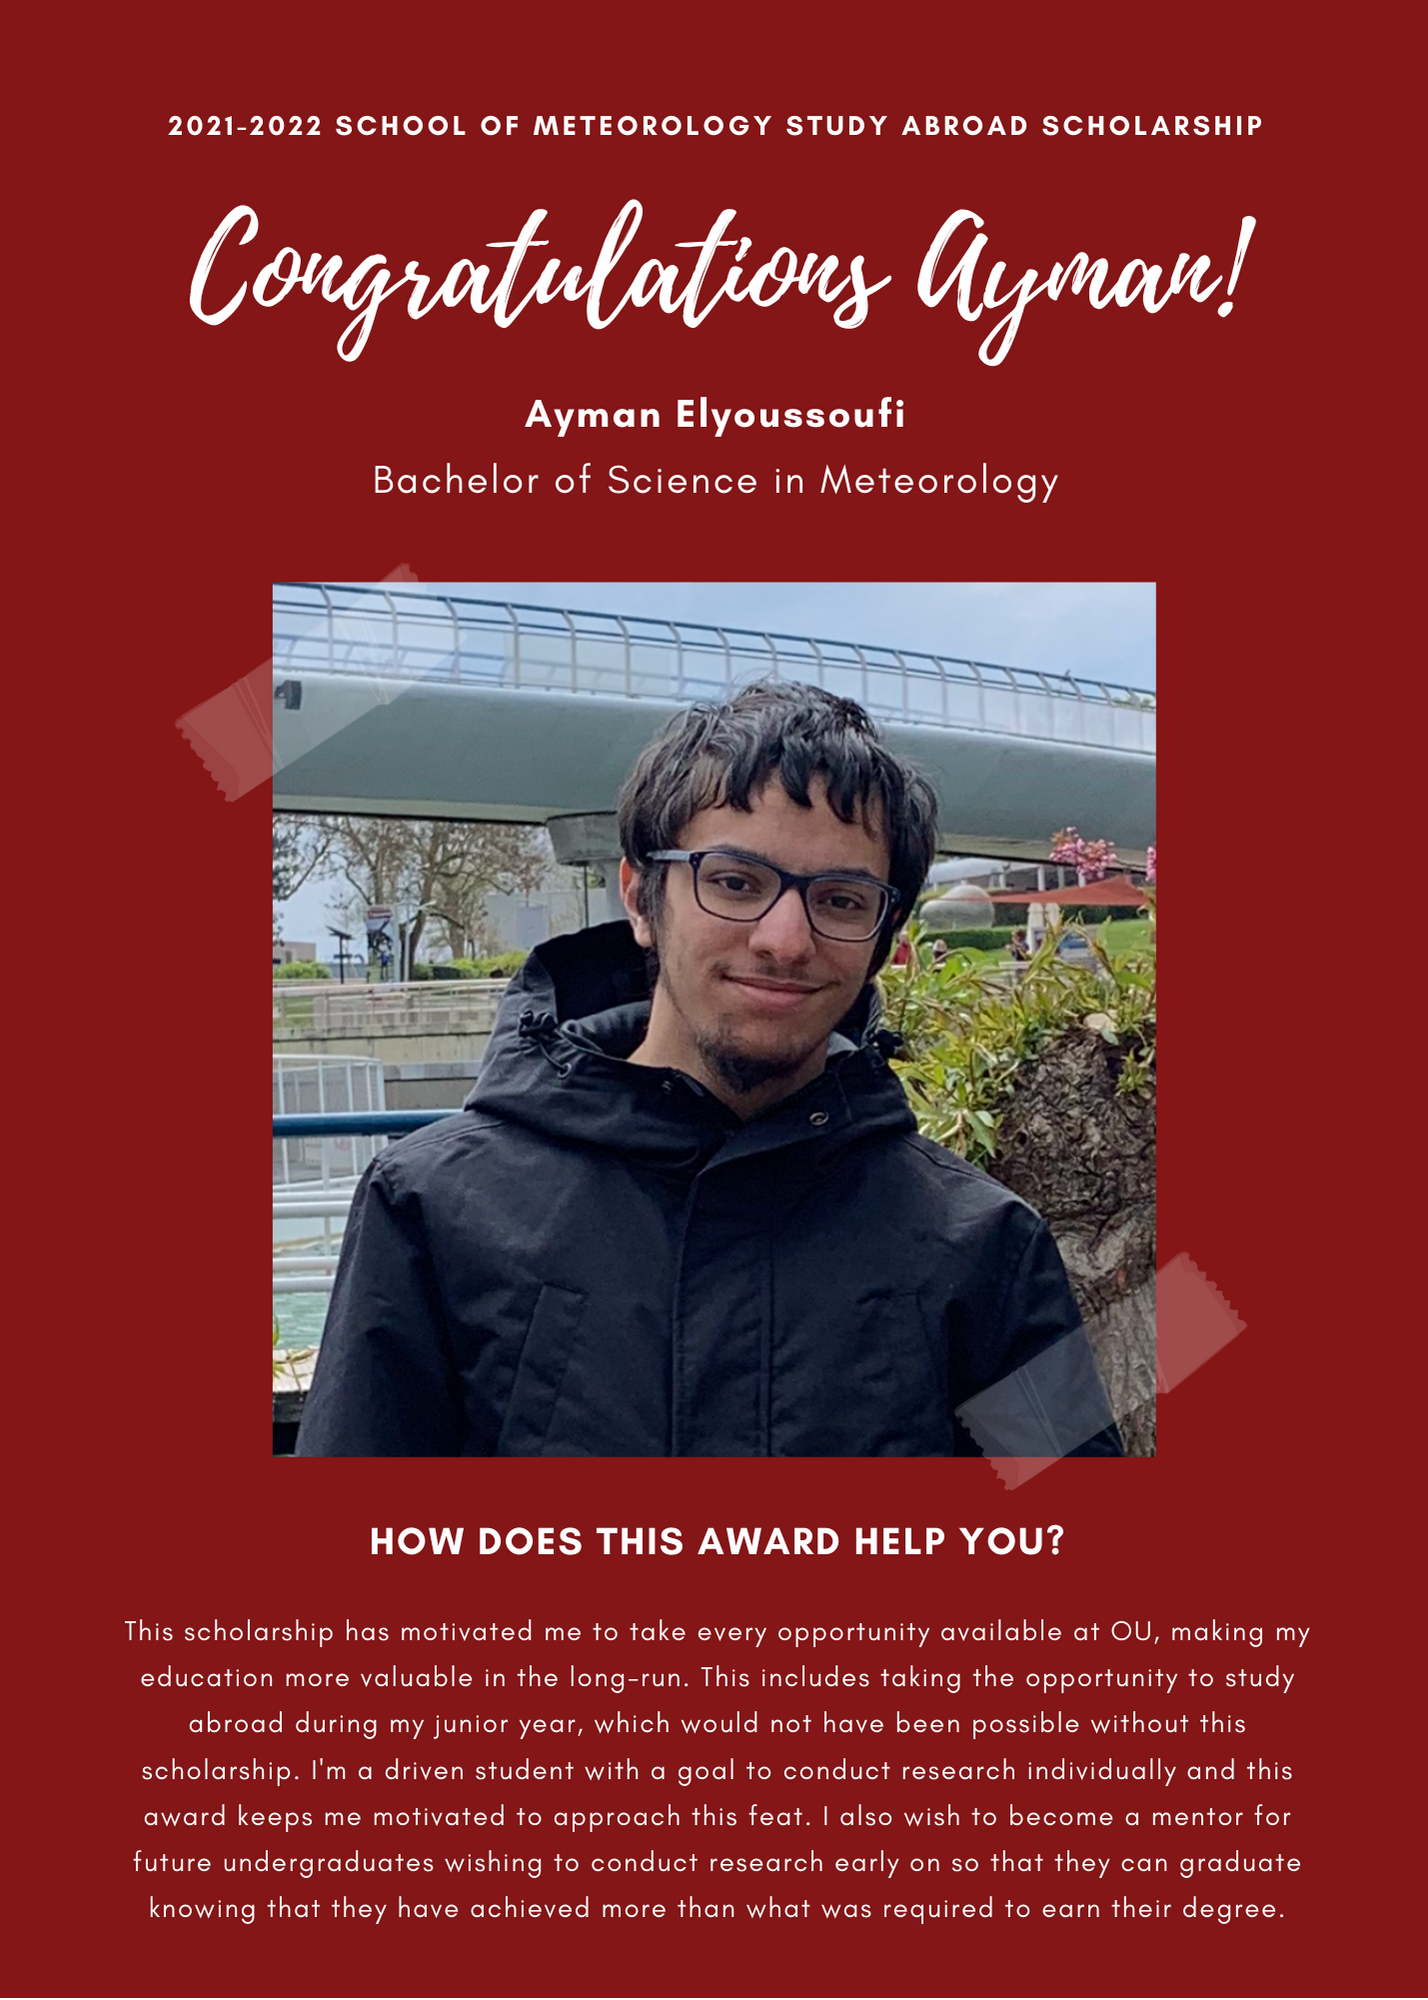 2021 -2022 A&GS SOM Study Abroad Scholarships. Congratulations Ayman! Ayman Elyoussoufi Bachelor of Science in Meteorology. How does this award help you? This scholarship has motivated me to take every opportunity available at OU, making my education more valuable in the long-run. This incudes taking the opportunity to study abroad during my junior year, which would not have been possible without this scholarship. I am a driven student with a goal to conduct research individually and this award keeps me motivated to approach this feat. I also wish to become a mentor for future undergraduates wishing to conduct research early on so that they can graduate knowing that they have acheived more than what was required to earn their degree.